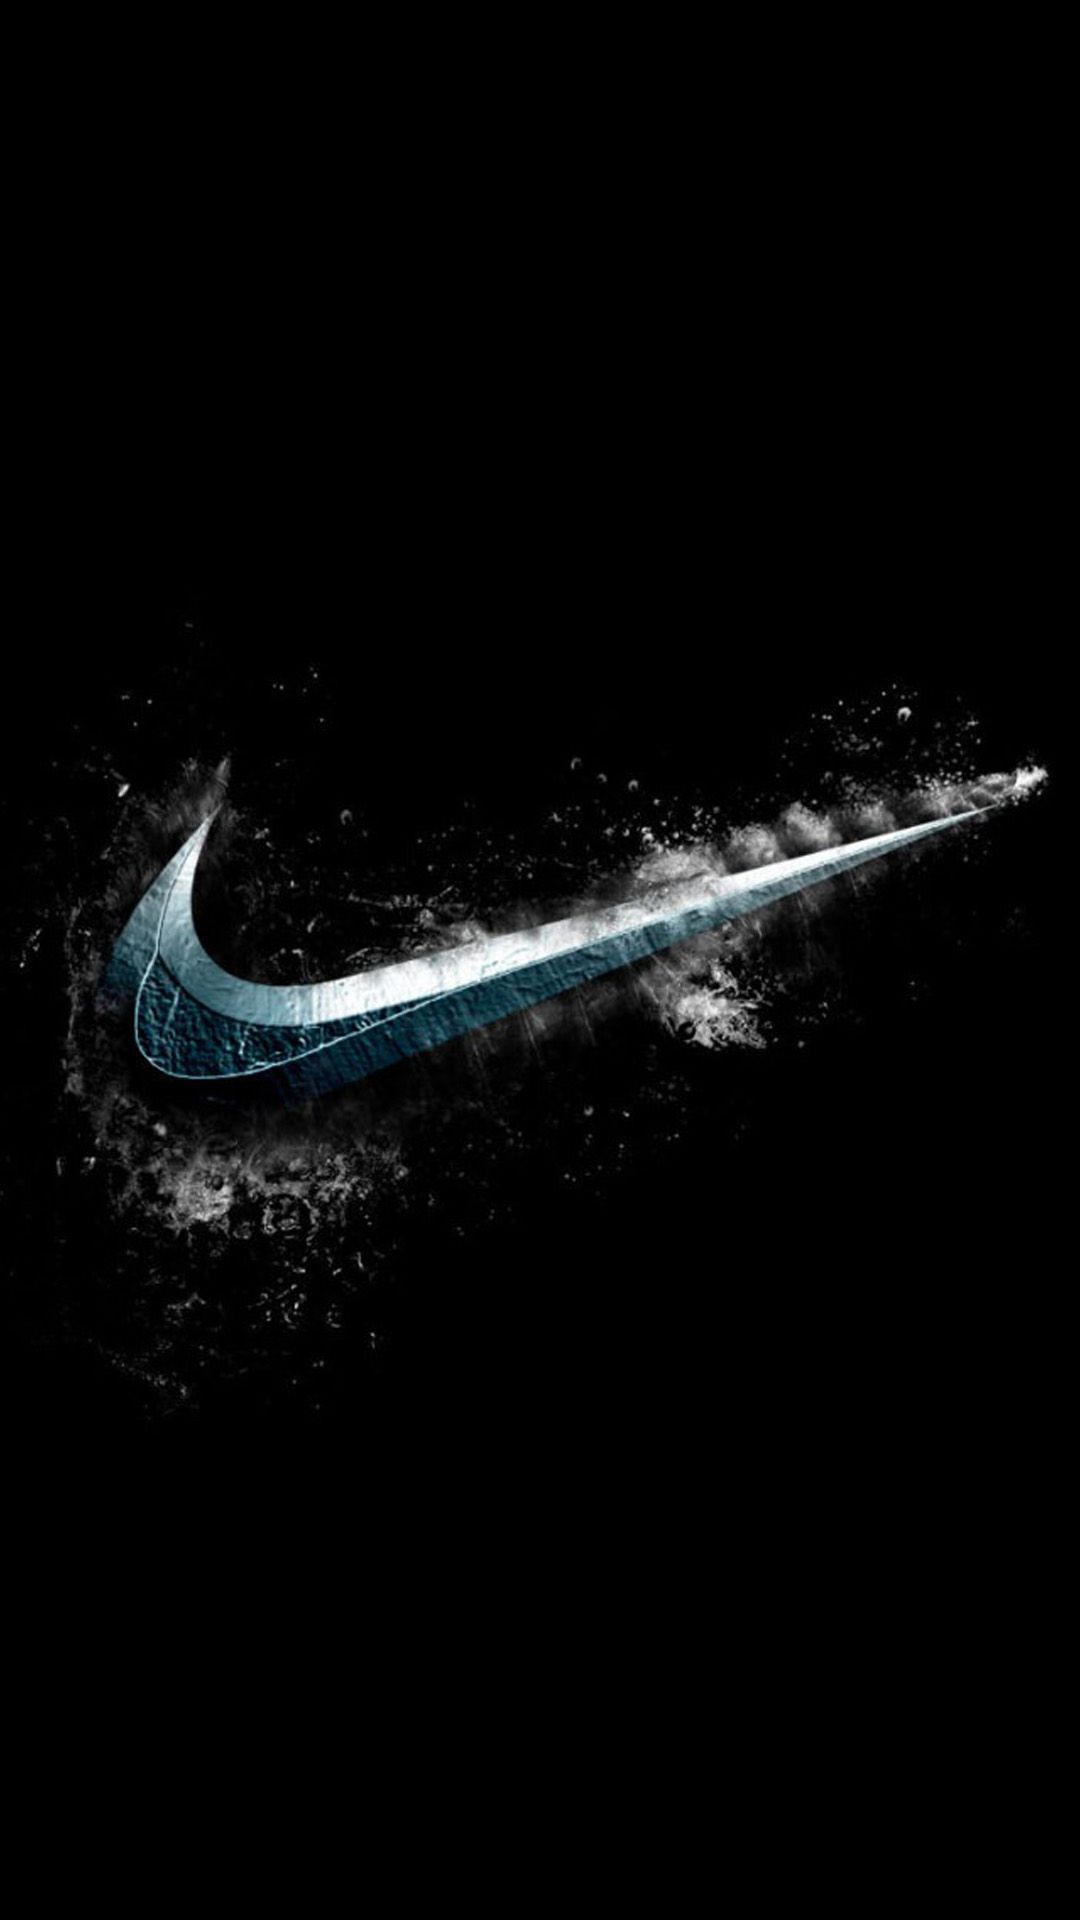 Galaxy Nike Wallpaper High Definition Hupages Download iPhone Wallpaper. Nike wallpaper, Nike logo wallpaper, Nike wallpaper iphone